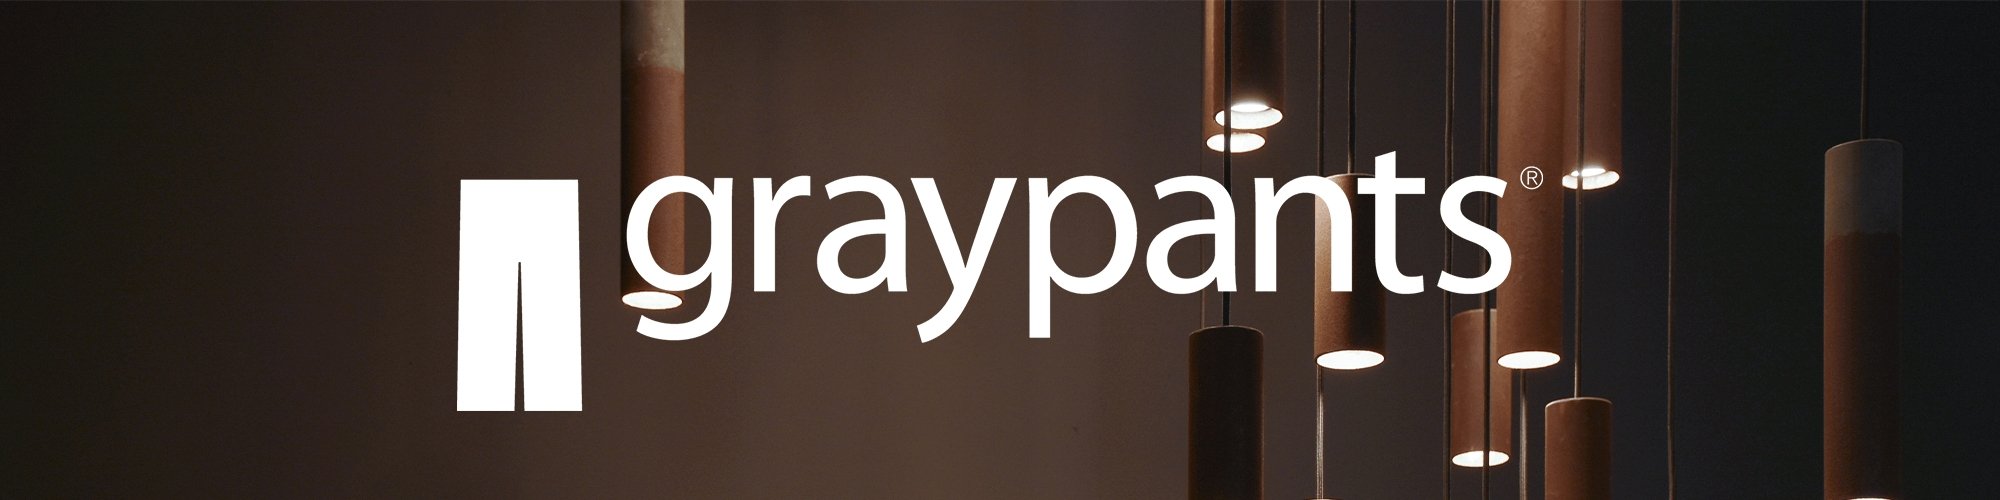 Graypants - Curated